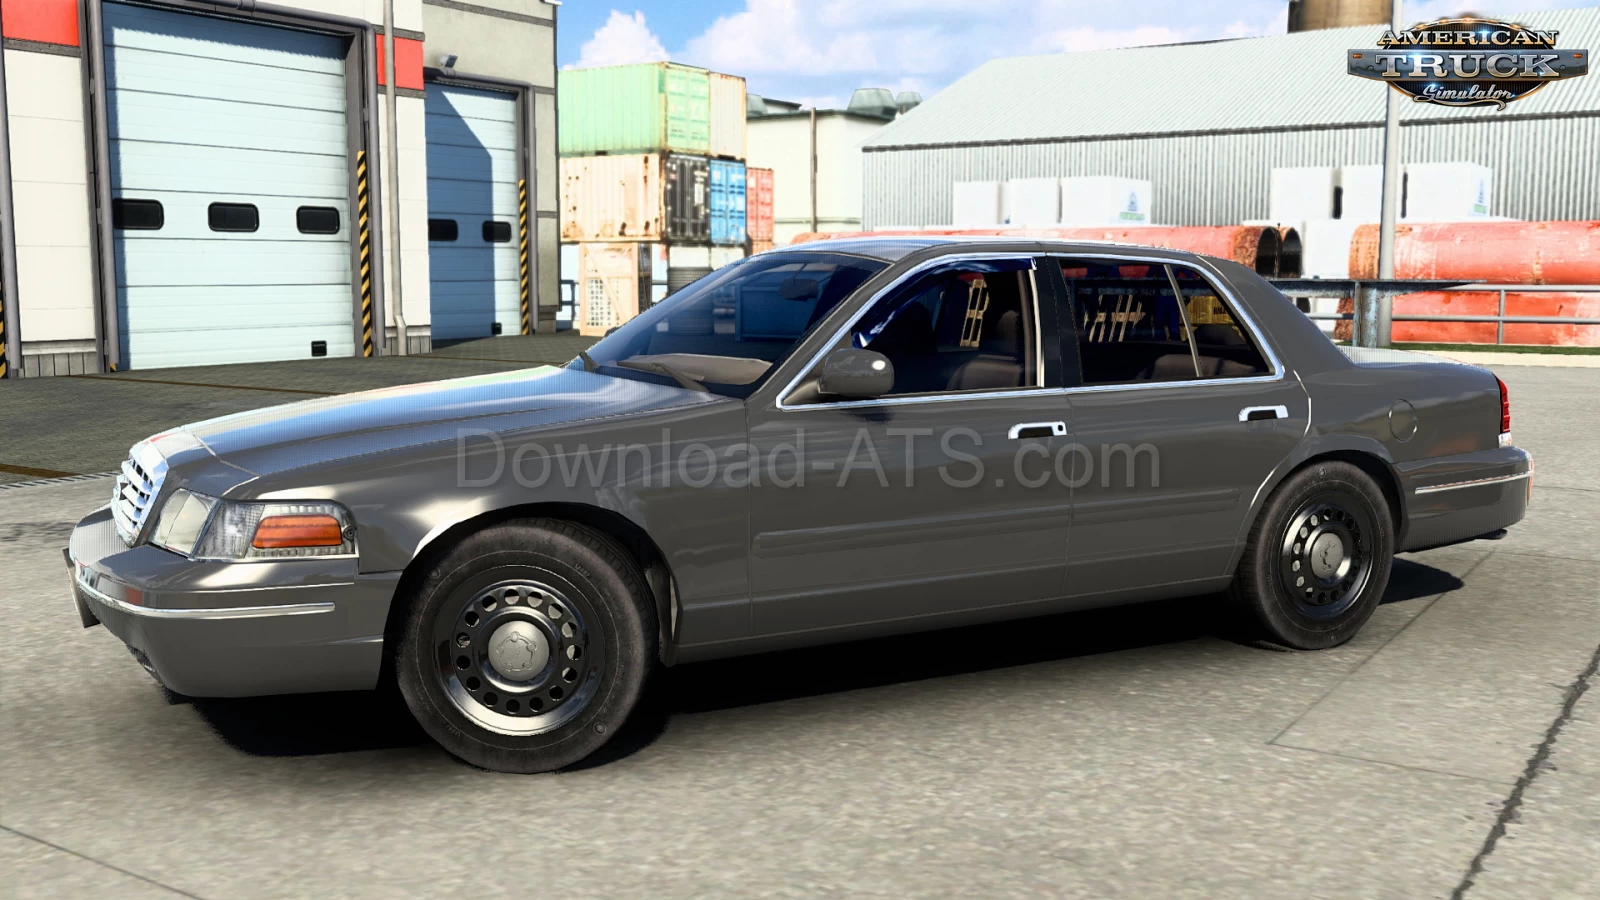 Ford Crown Victoria v5.6 by Metehan BİLAL (1.47.x) for ATS